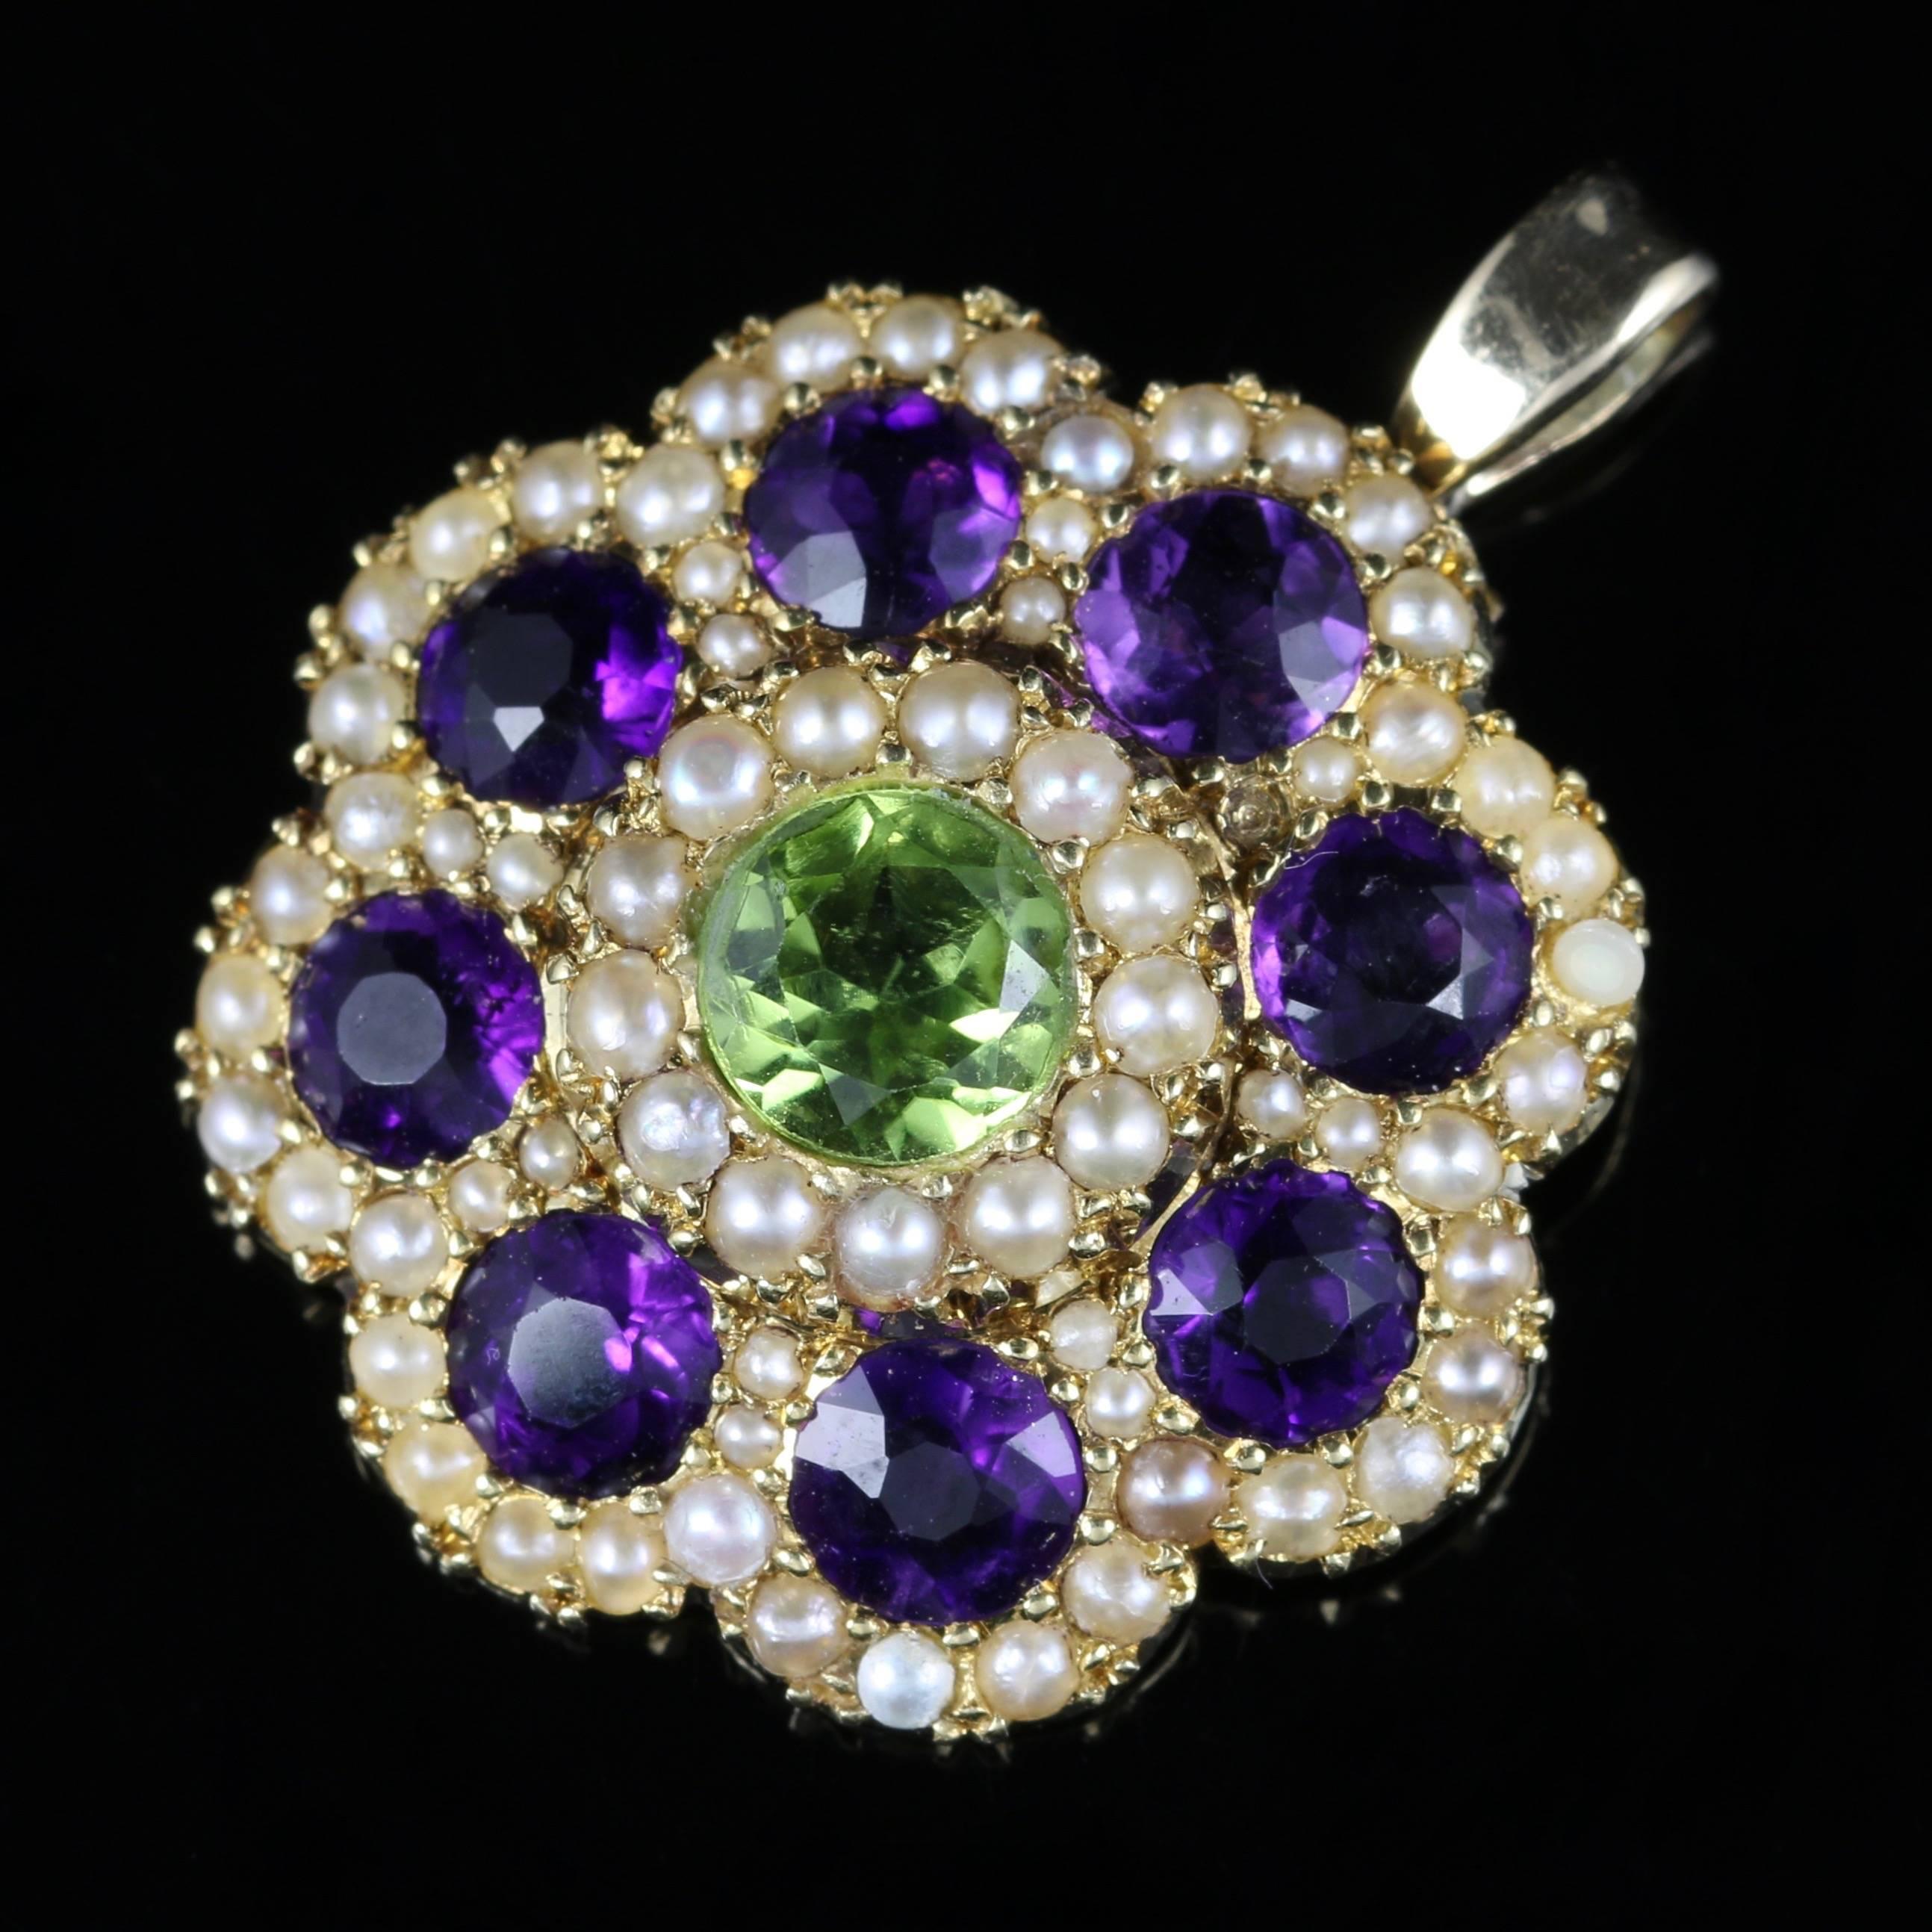 For more details please click continue reading down below..

This fabulous 15ct Yellow Gold Antique Victorian Suffragette pendant is absolutely stunning.

A halo of Pearls decorate two inner galleries which are adorned with Amethysts and a central